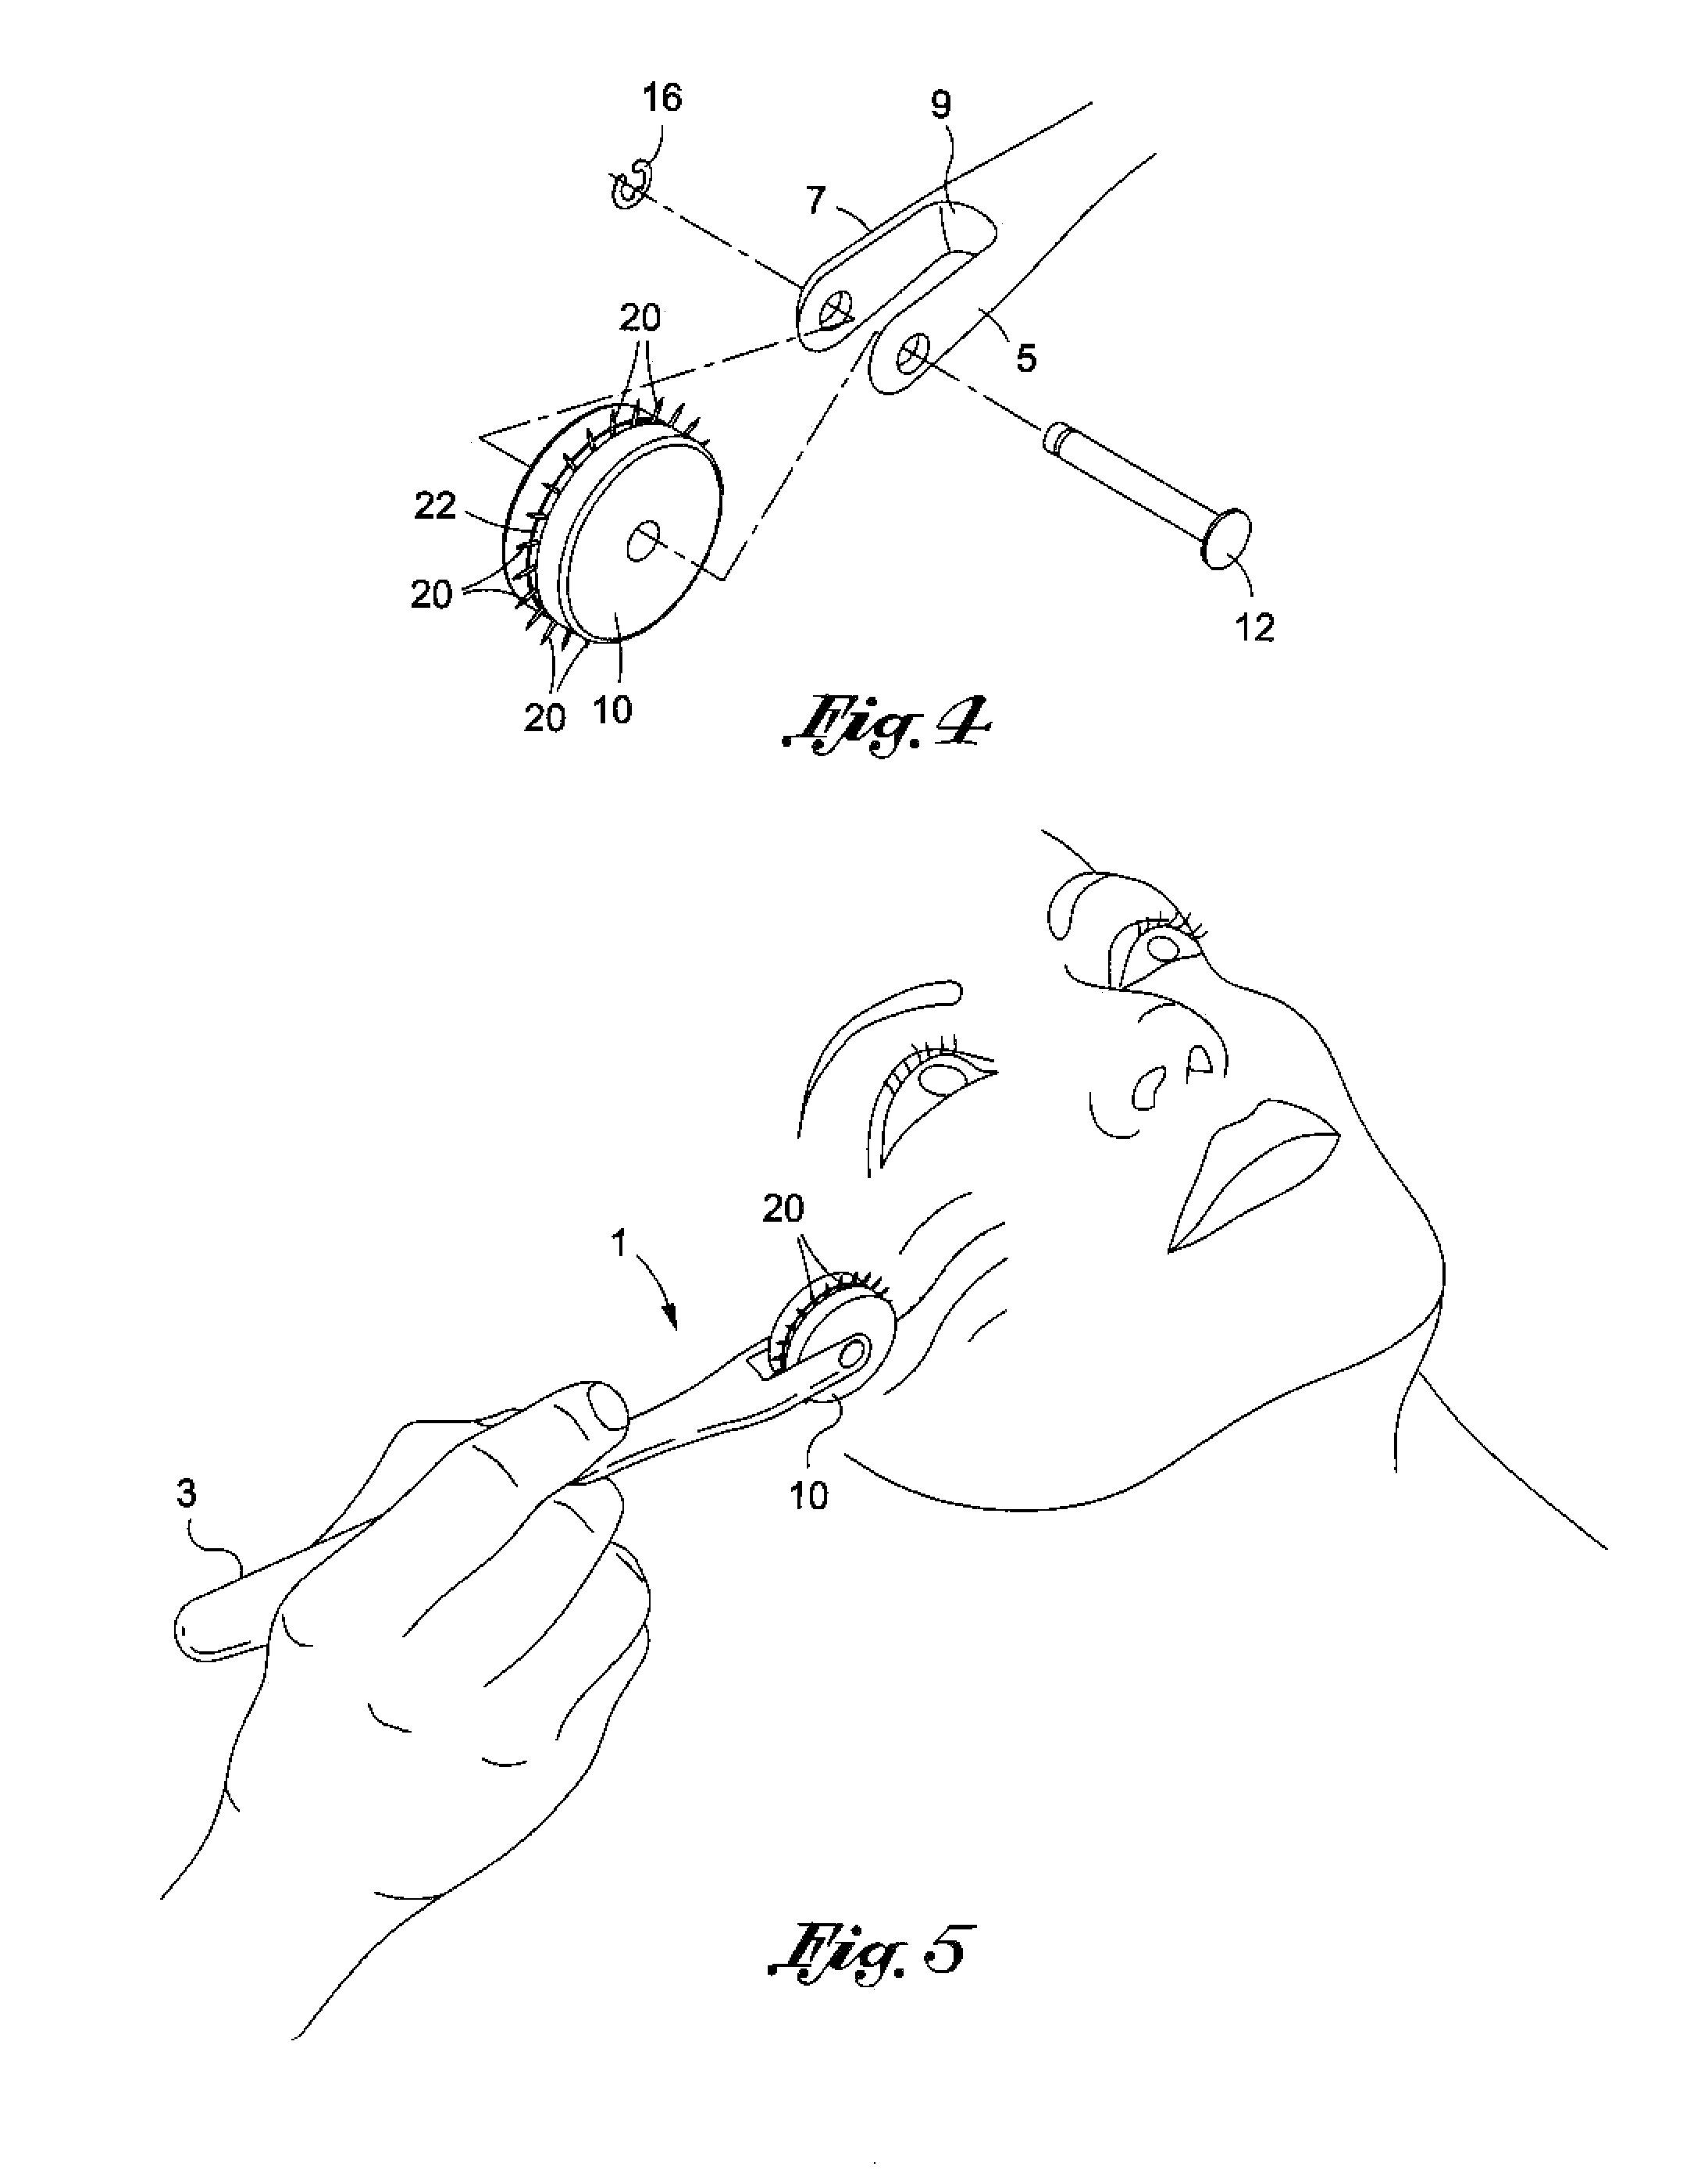 Hand-held apparatus and method for reducing wrinkles in human skin